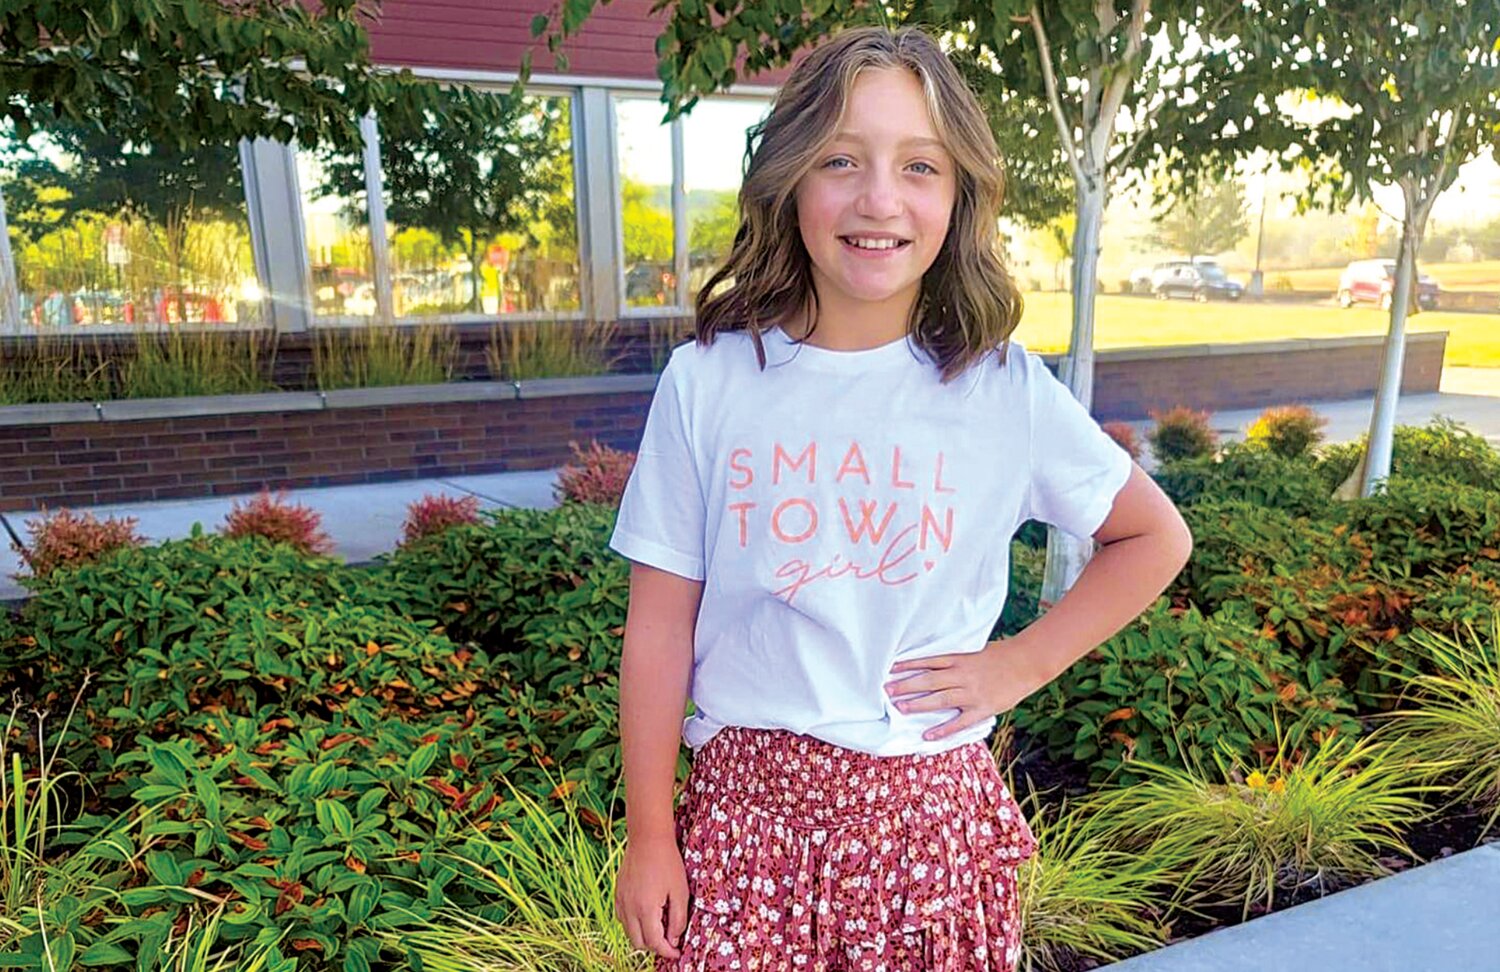 Tylie Tobin, 10, of Chehalis, was recently diagnosed with a cancerous brain stem tumor.